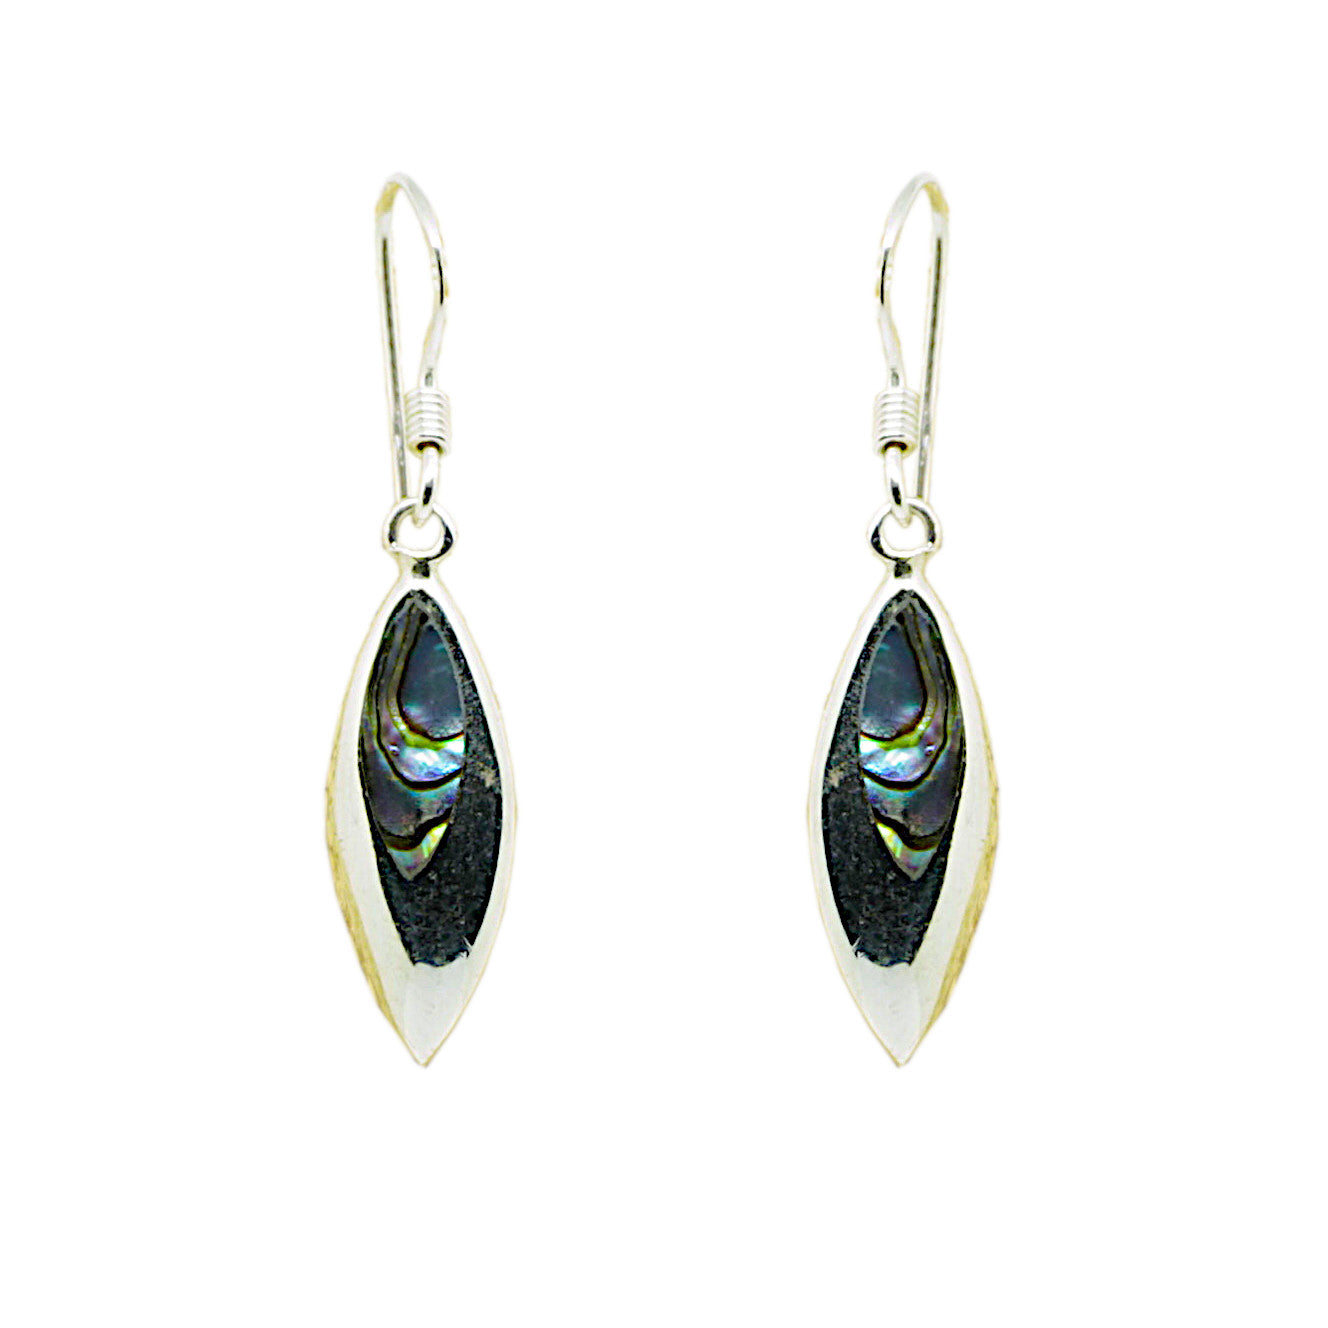 Abalone Shell Sterling Silver Earrings with Hook backs